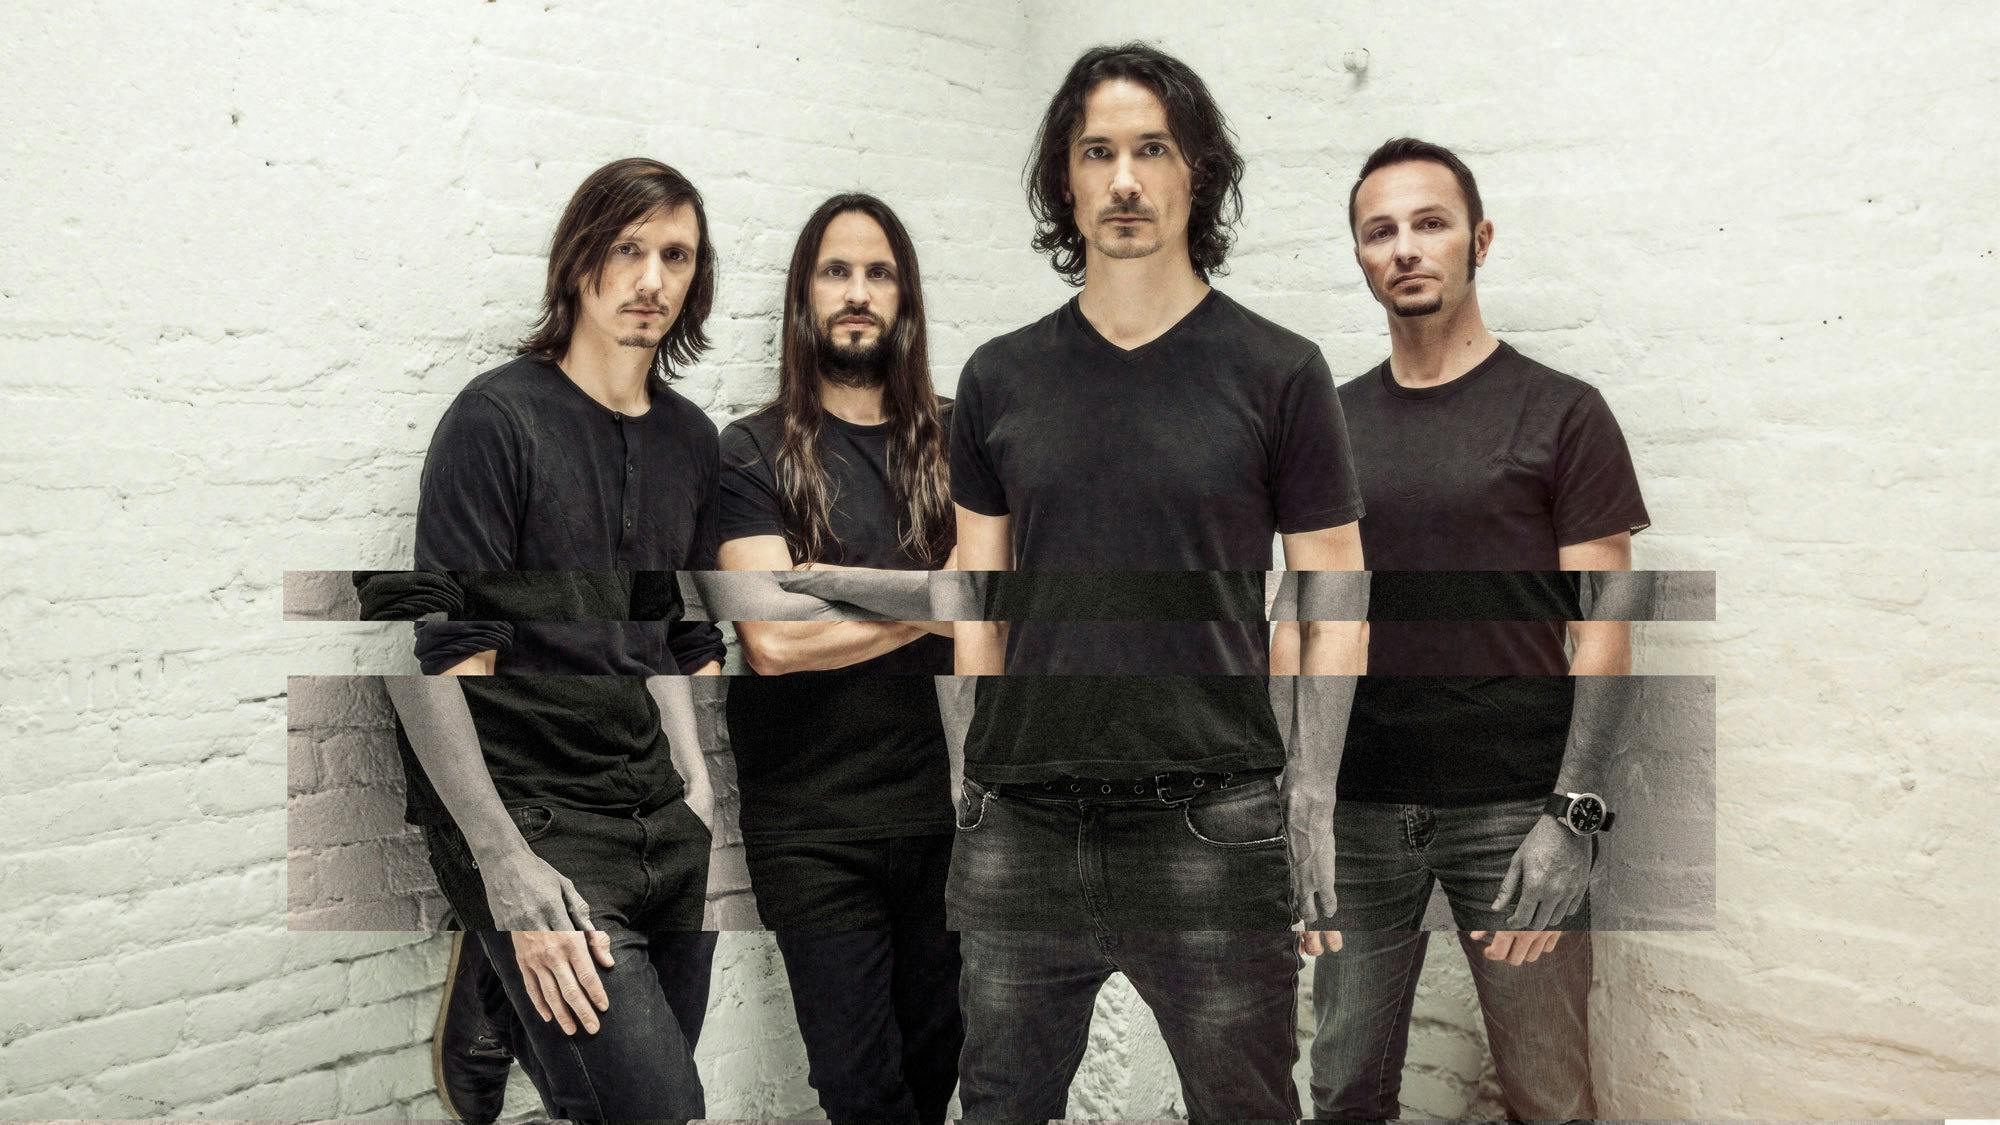 Gojira On Their New Album "We Are Very Happy And Super Proud Of It